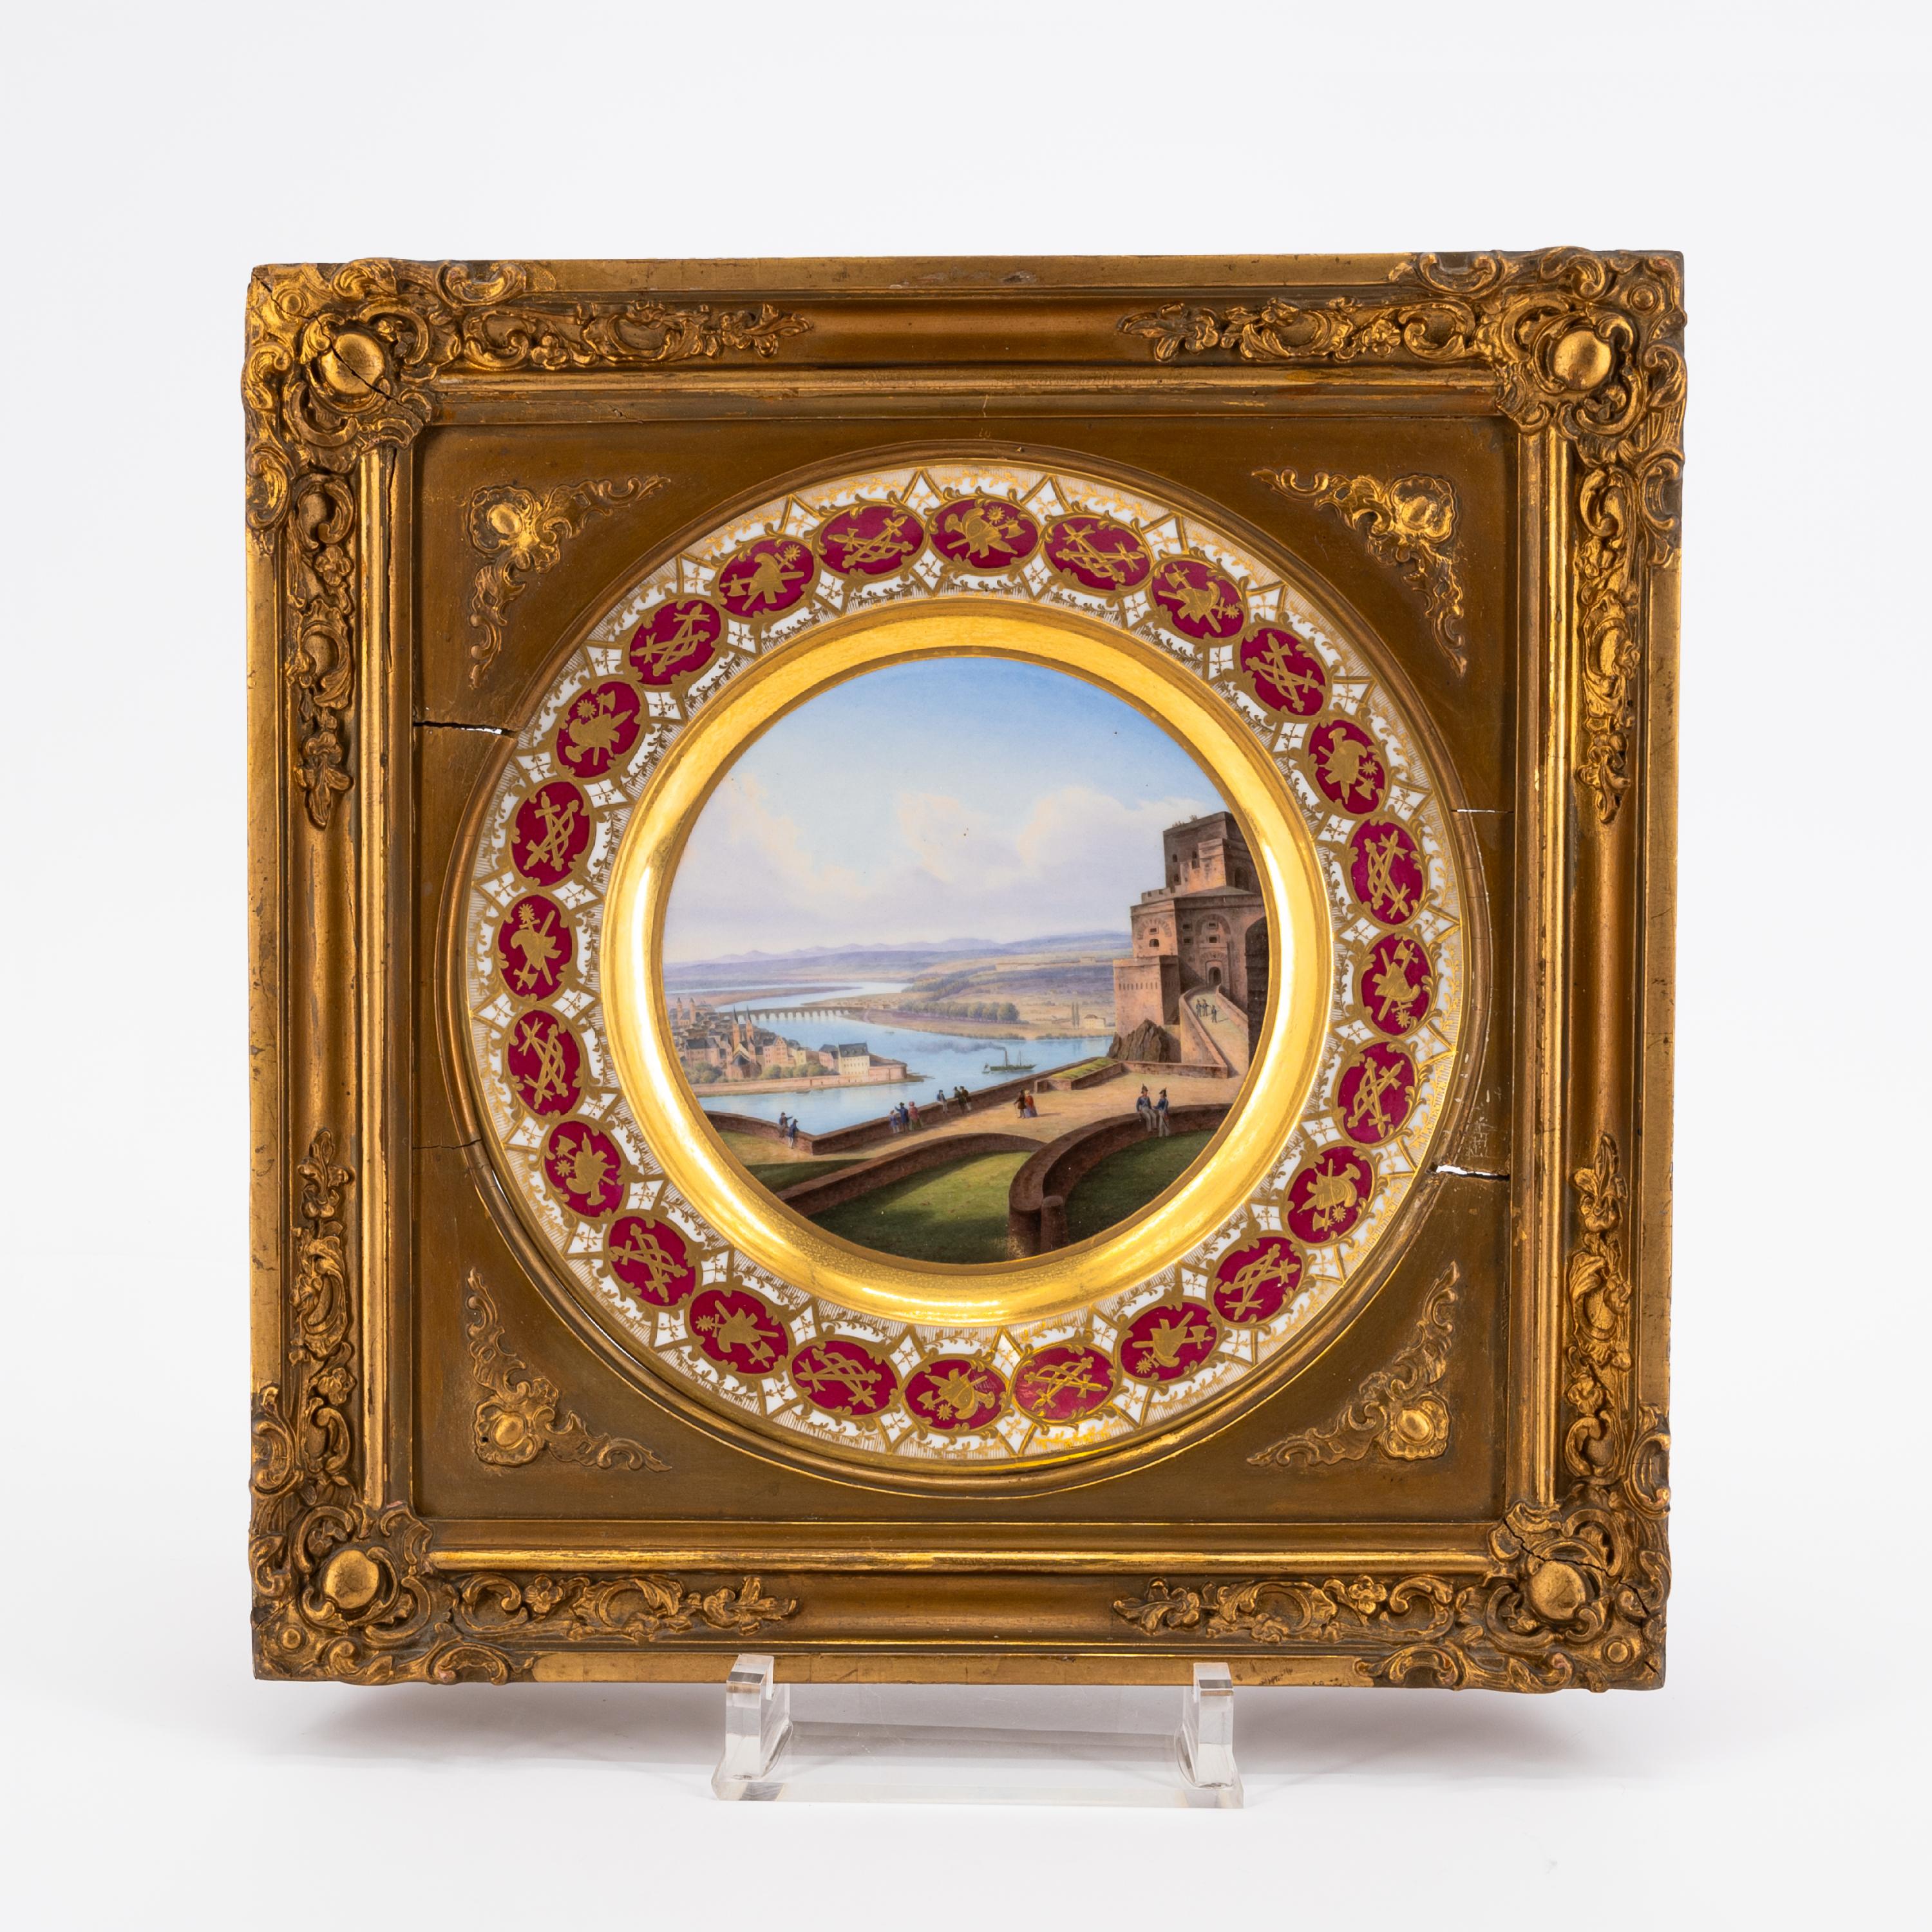 EXEPTIONAL SERIES OF TWELVE PORCELAIN PLATES WITH ROMANTIC VIEWS OF THE RHINE - Image 5 of 26